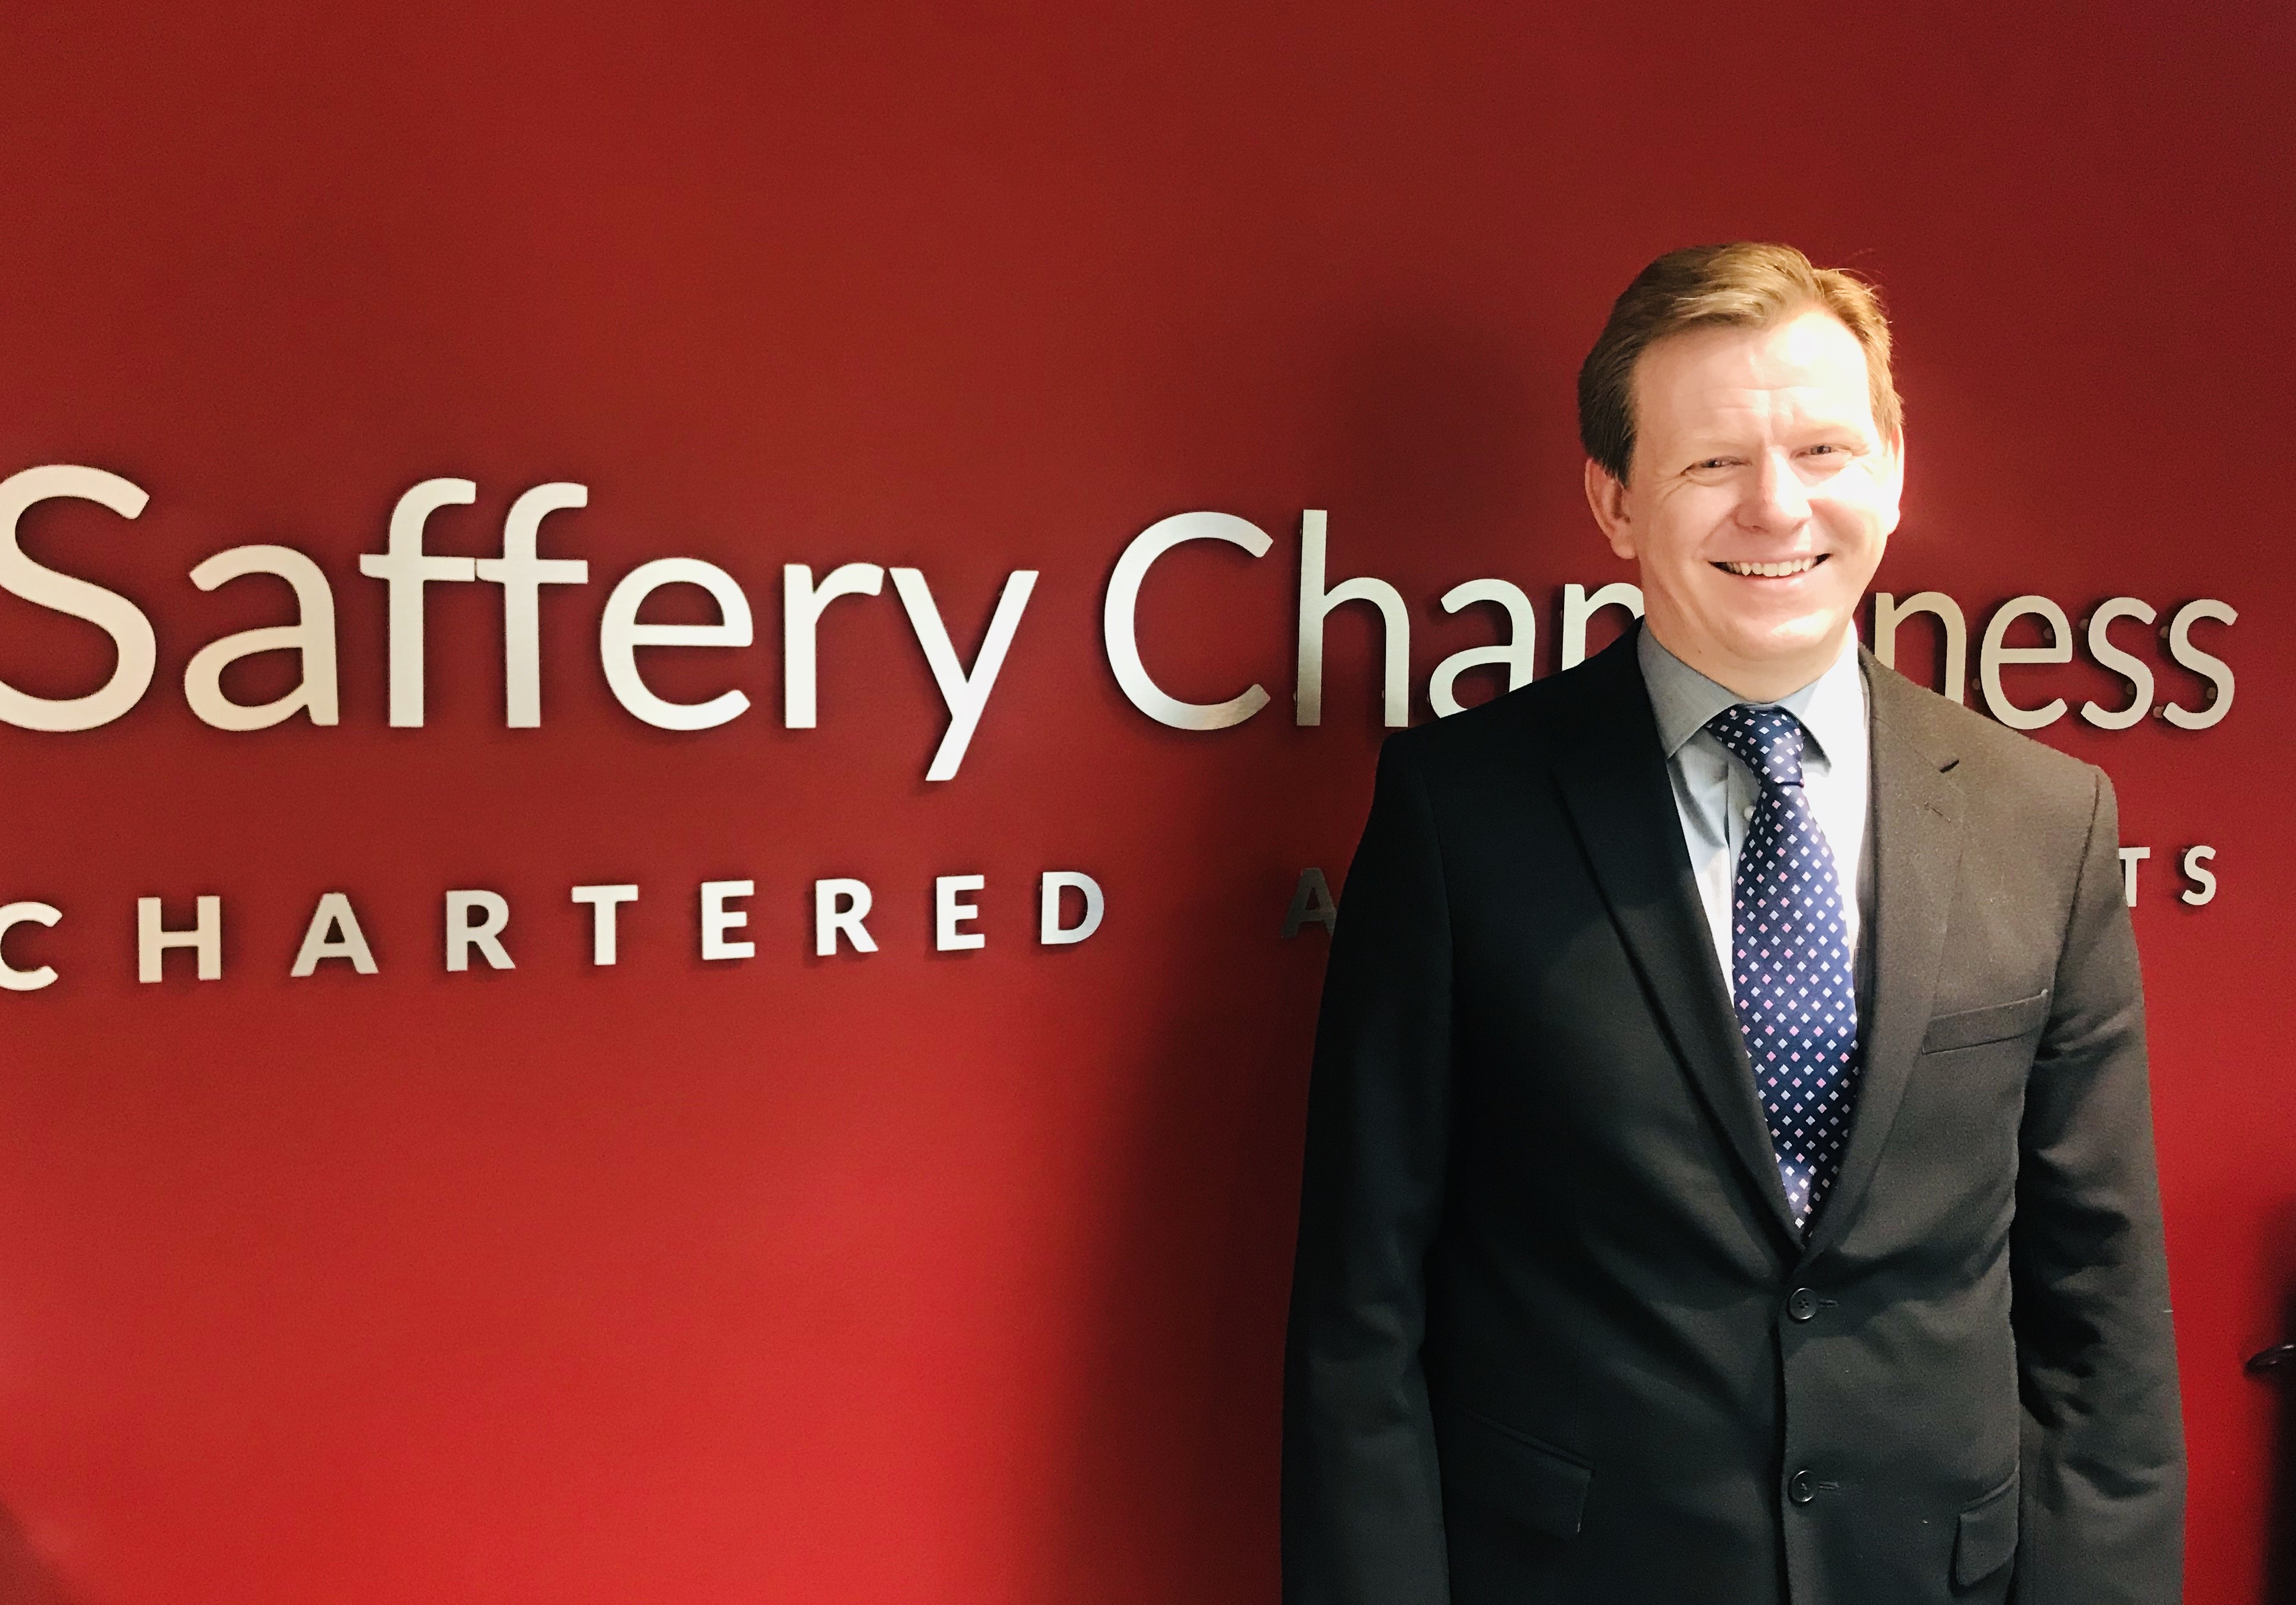 New Corporate Tax Manager joins expanding team at Saffery Champness Chartered Accountants